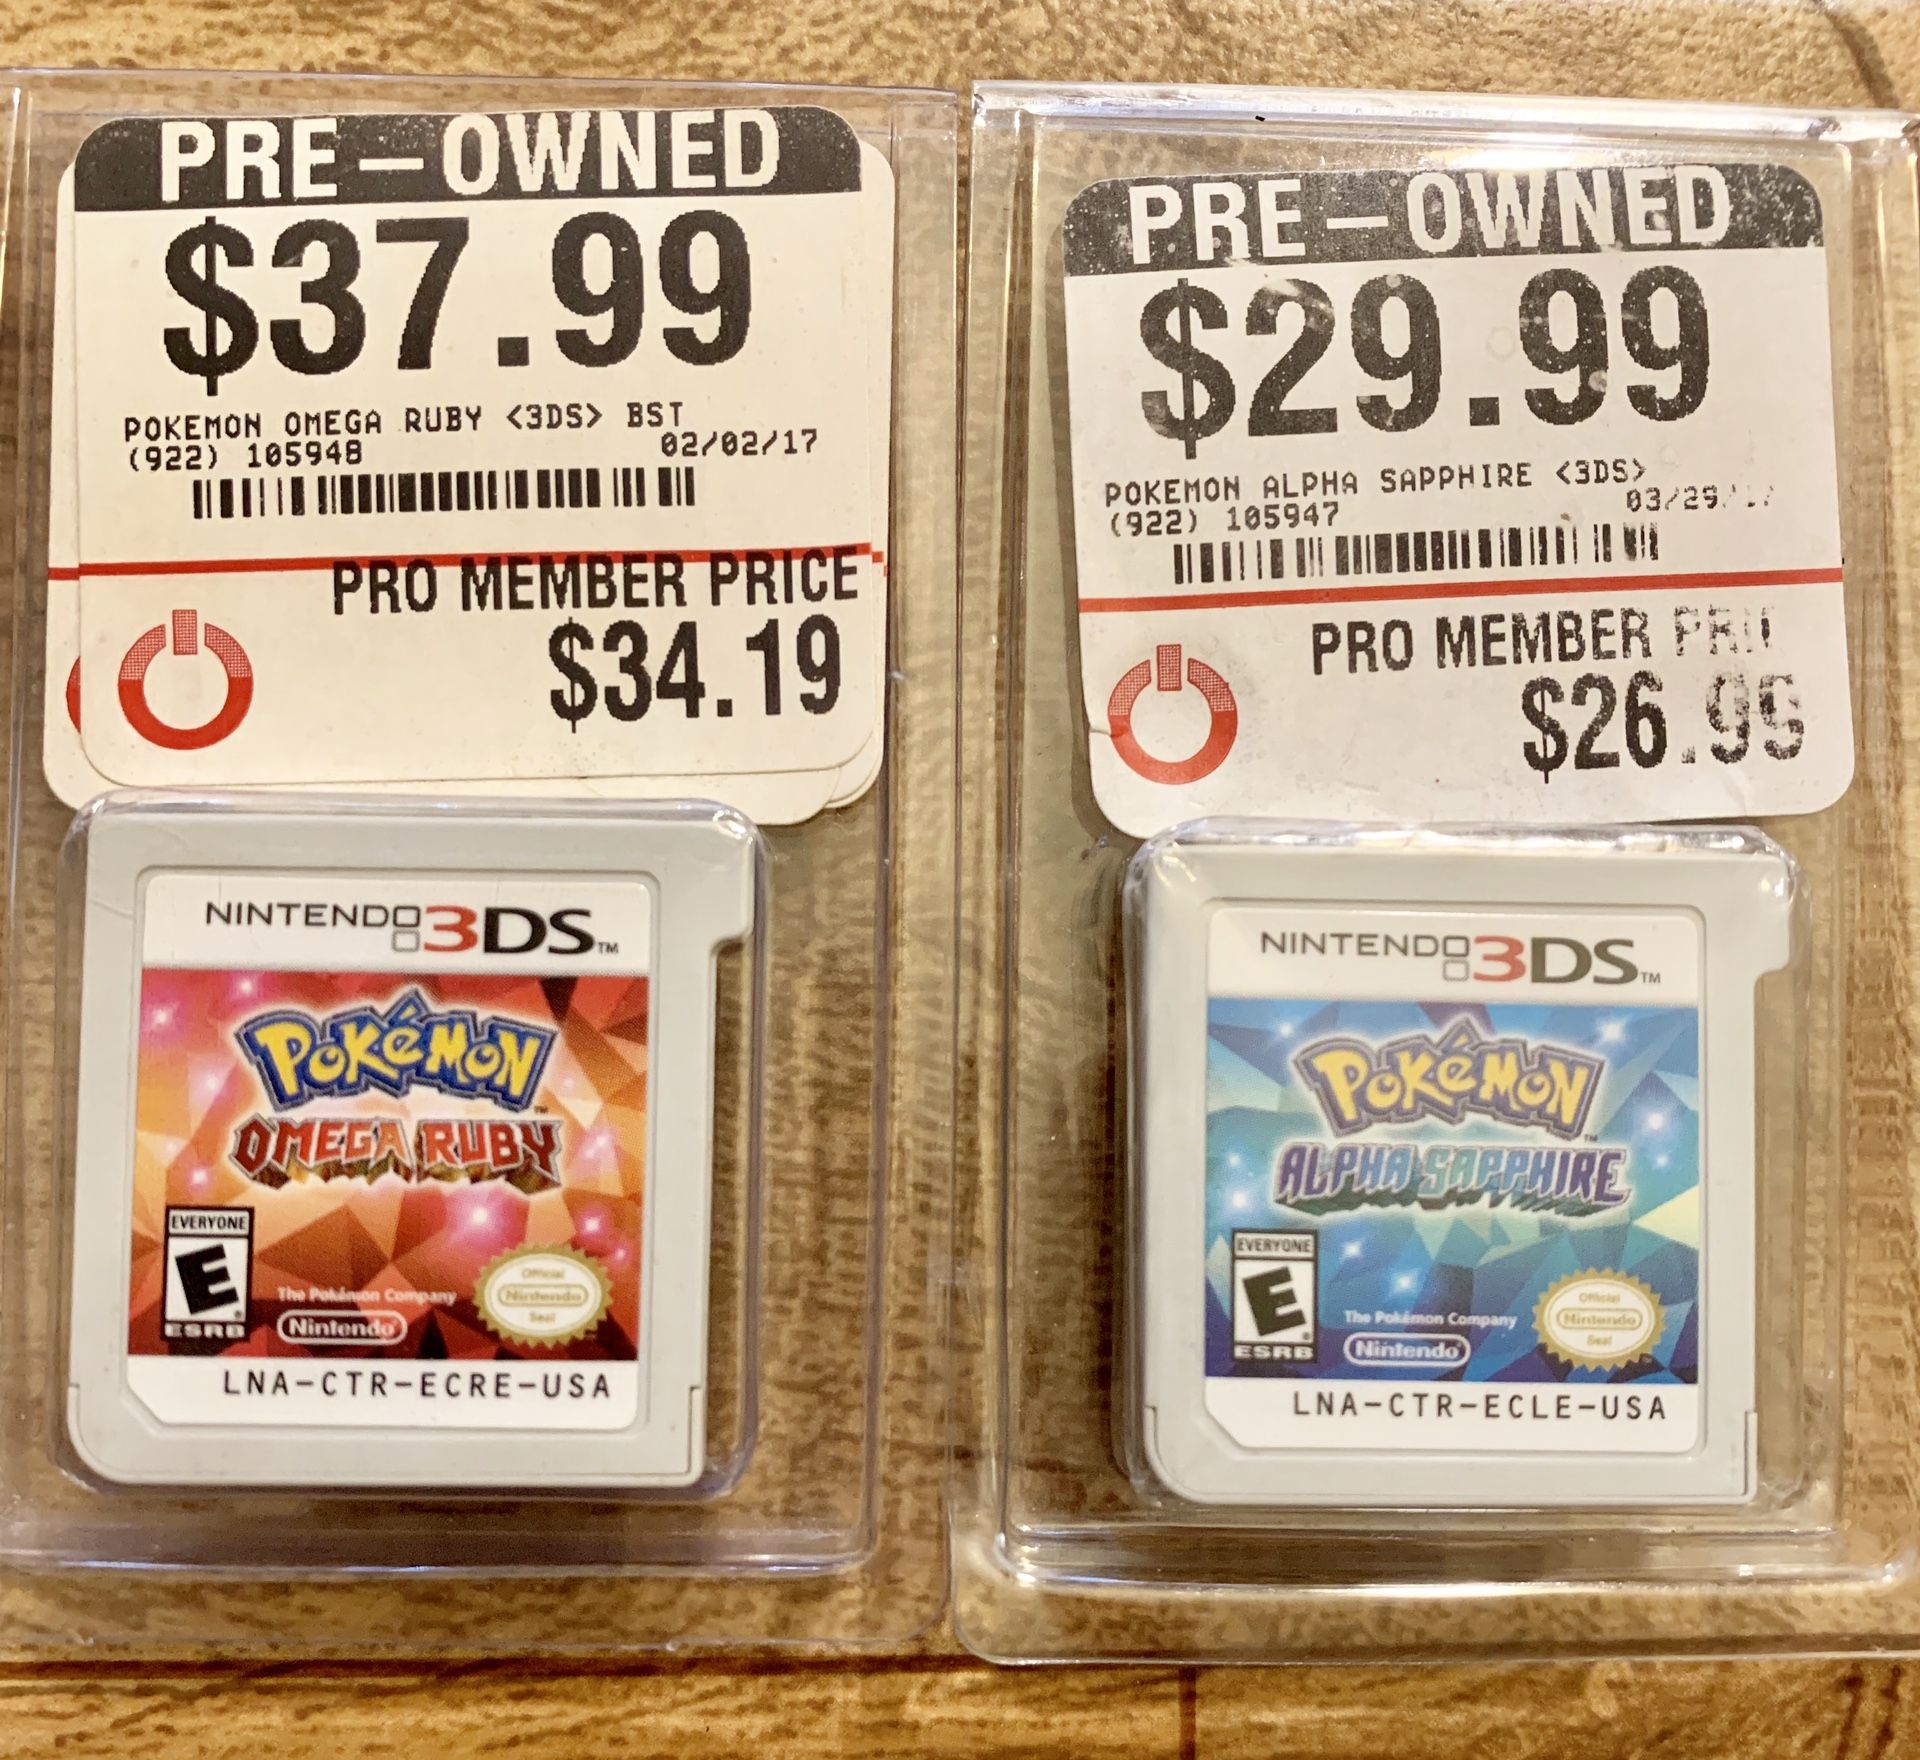 Two Pokémon games for Nintendo 3DS $25 for both